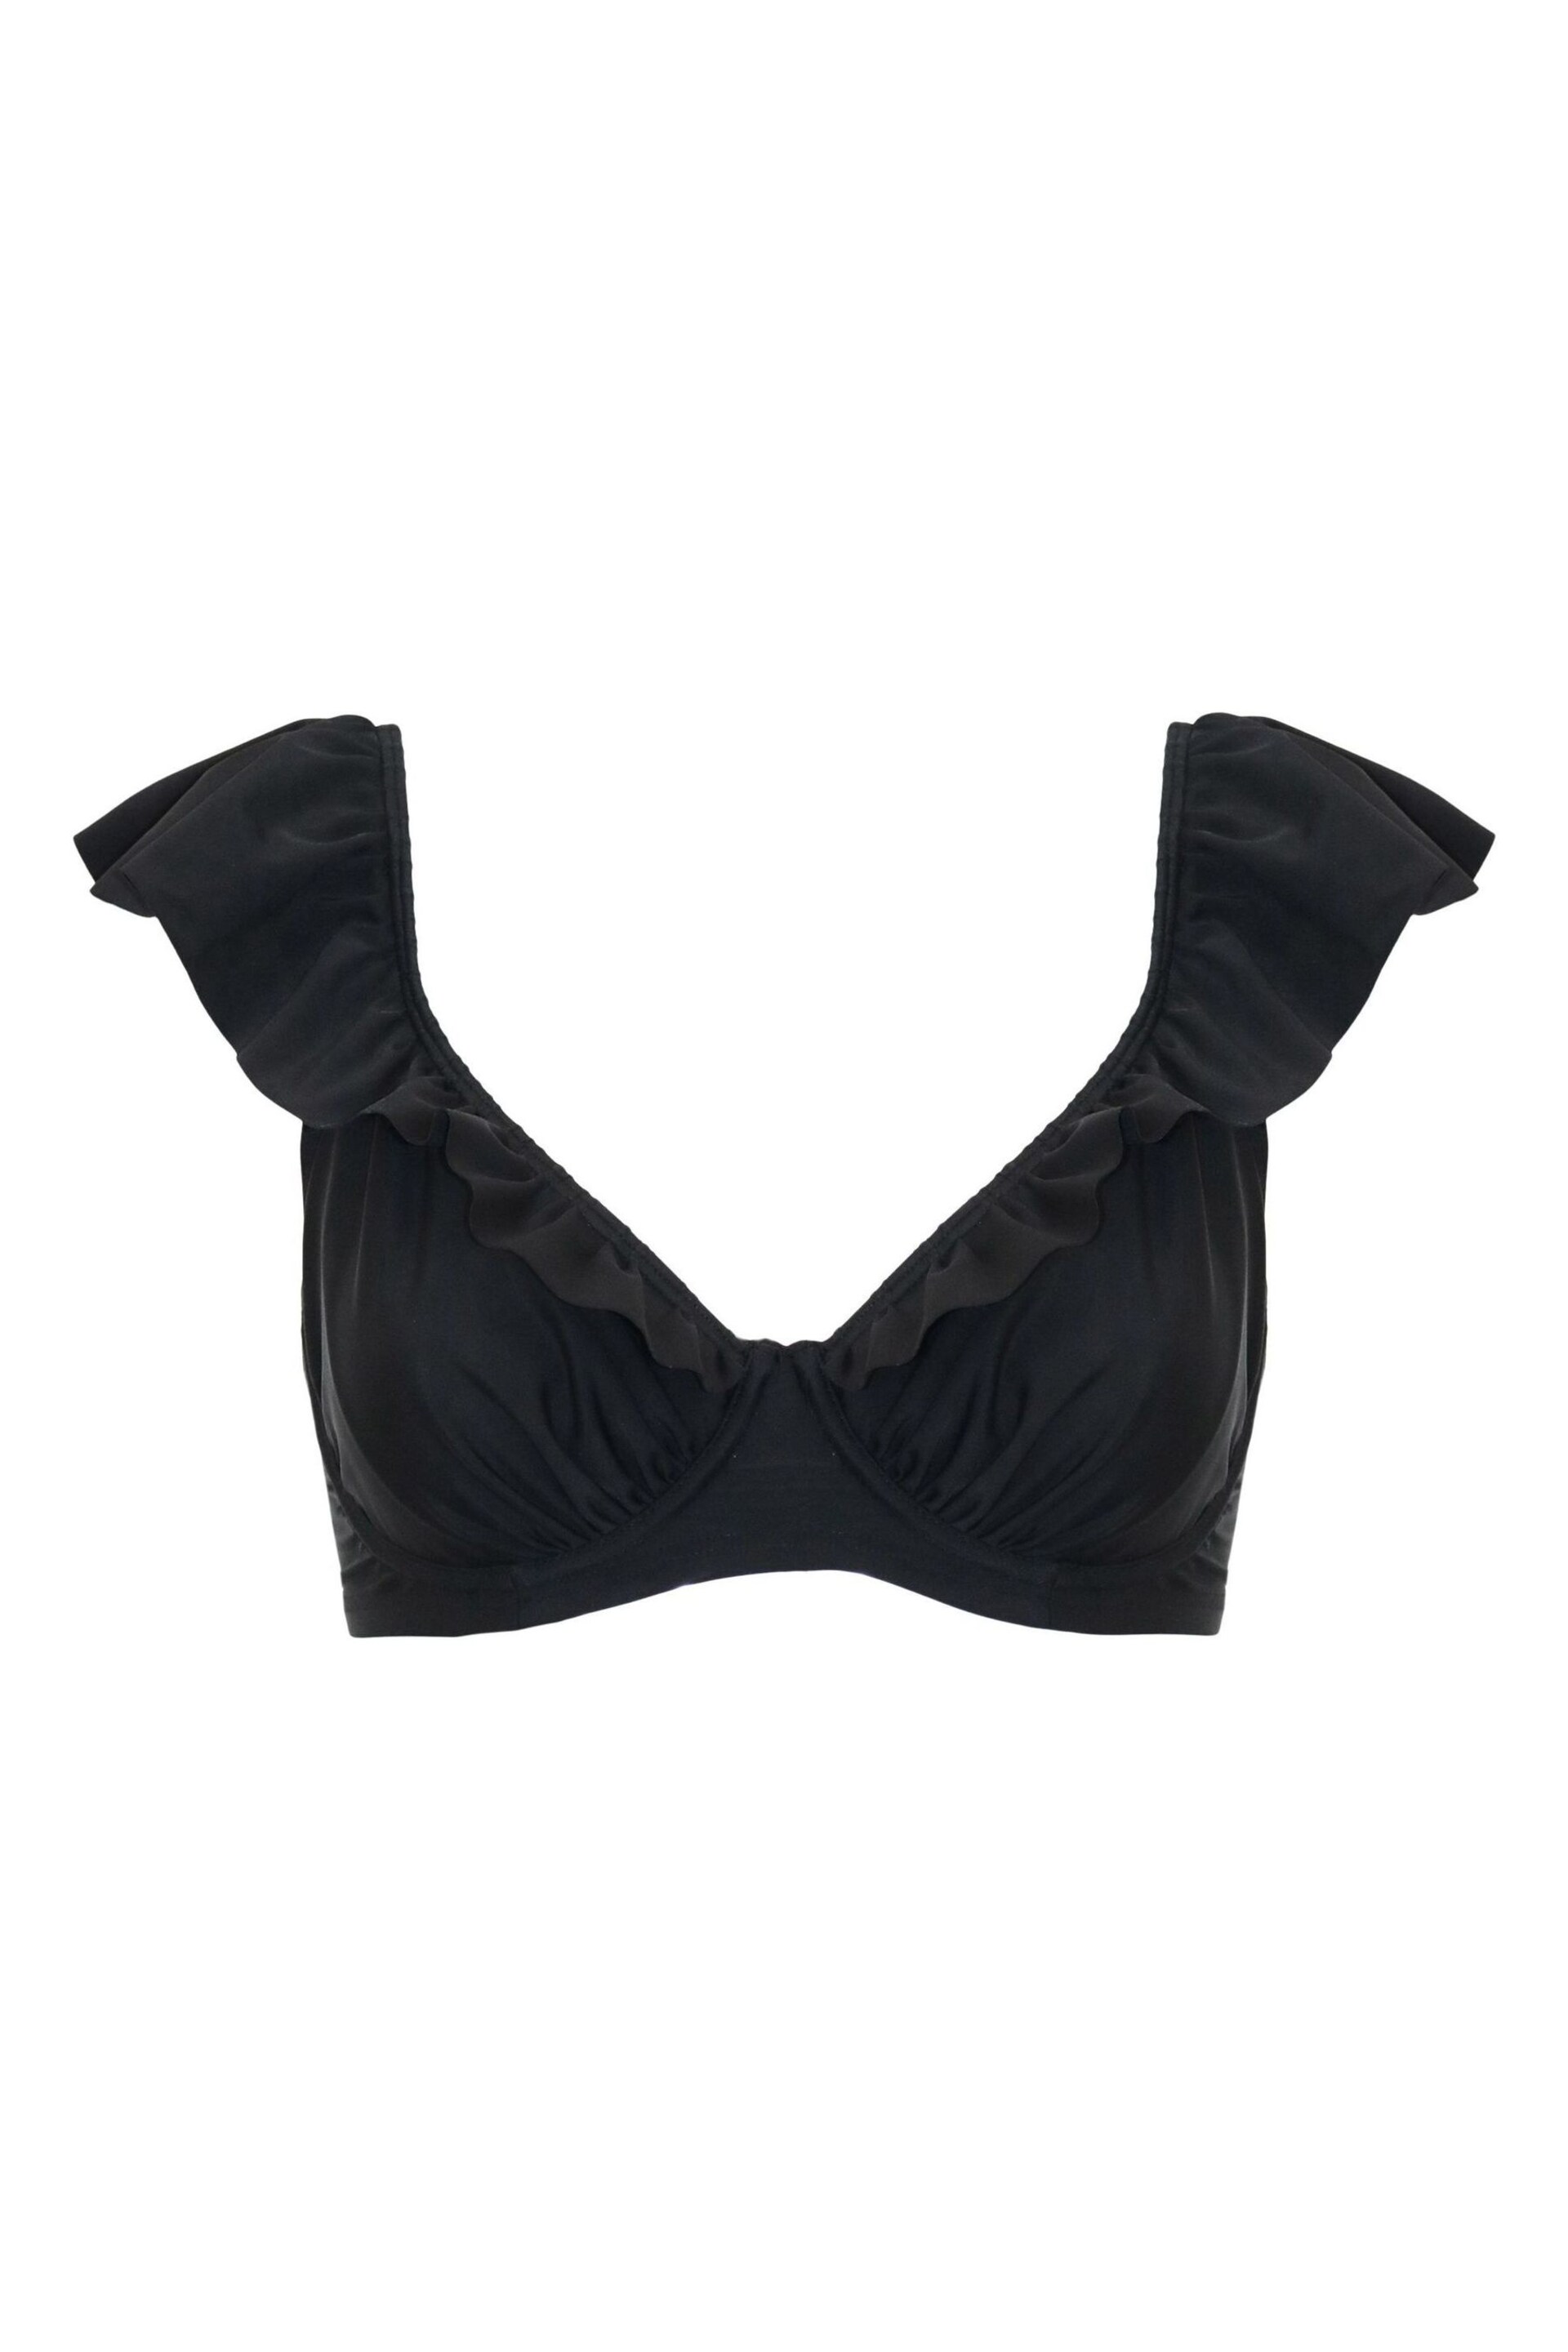 Pour Moi Black Bermuda Underwired Non Padded Frill Top - Image 4 of 5